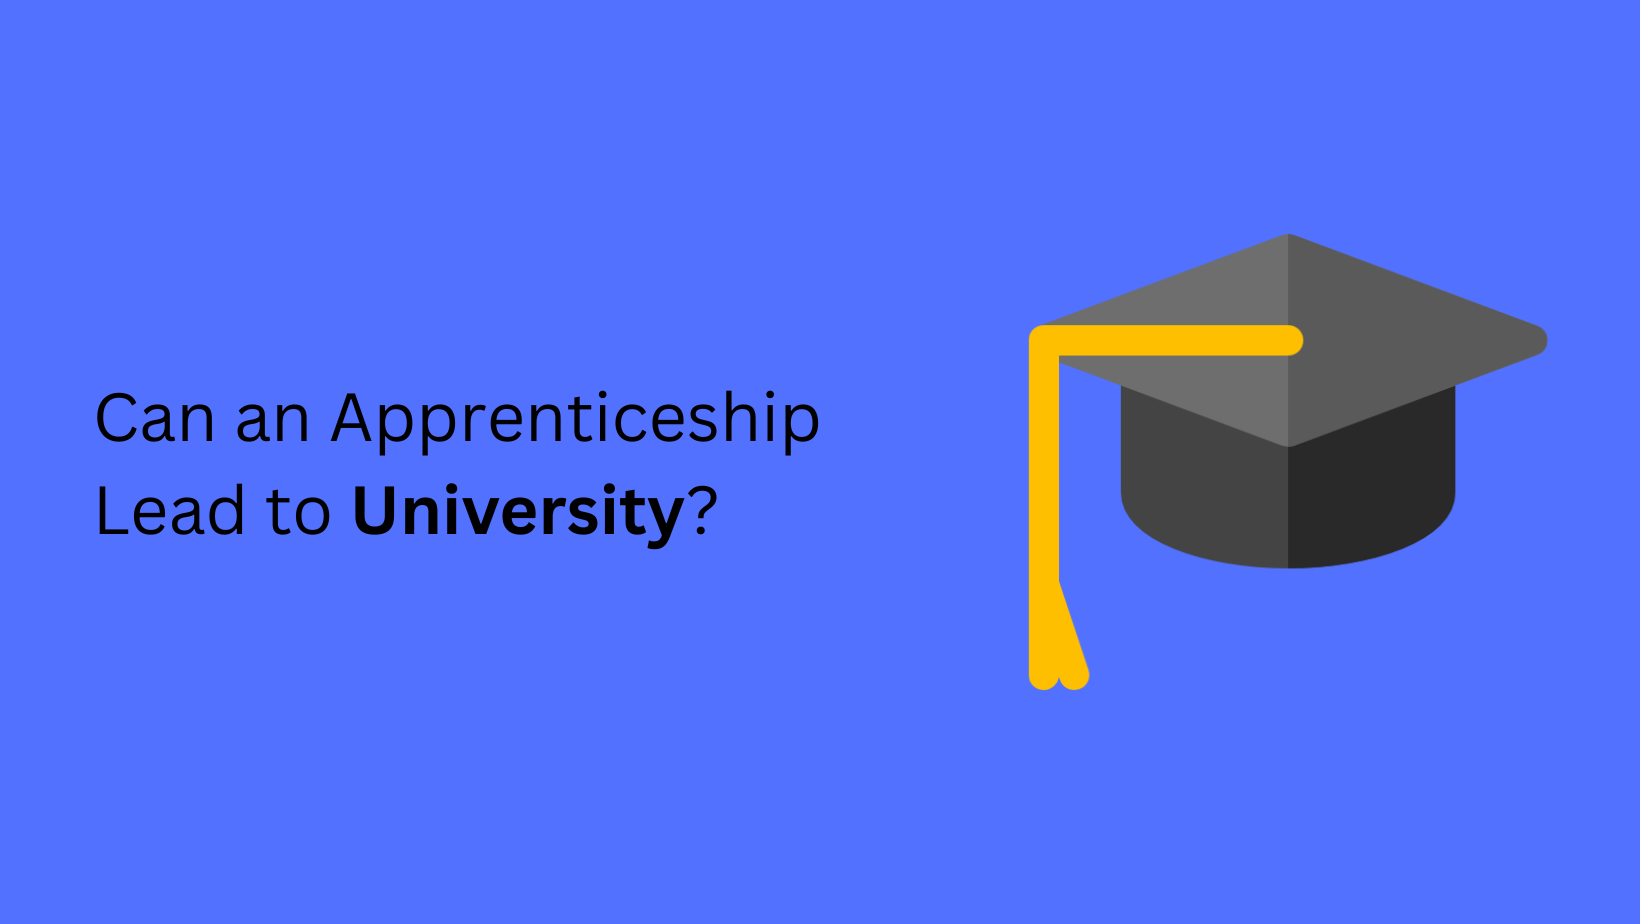 Can an Apprenticeship Lead to University